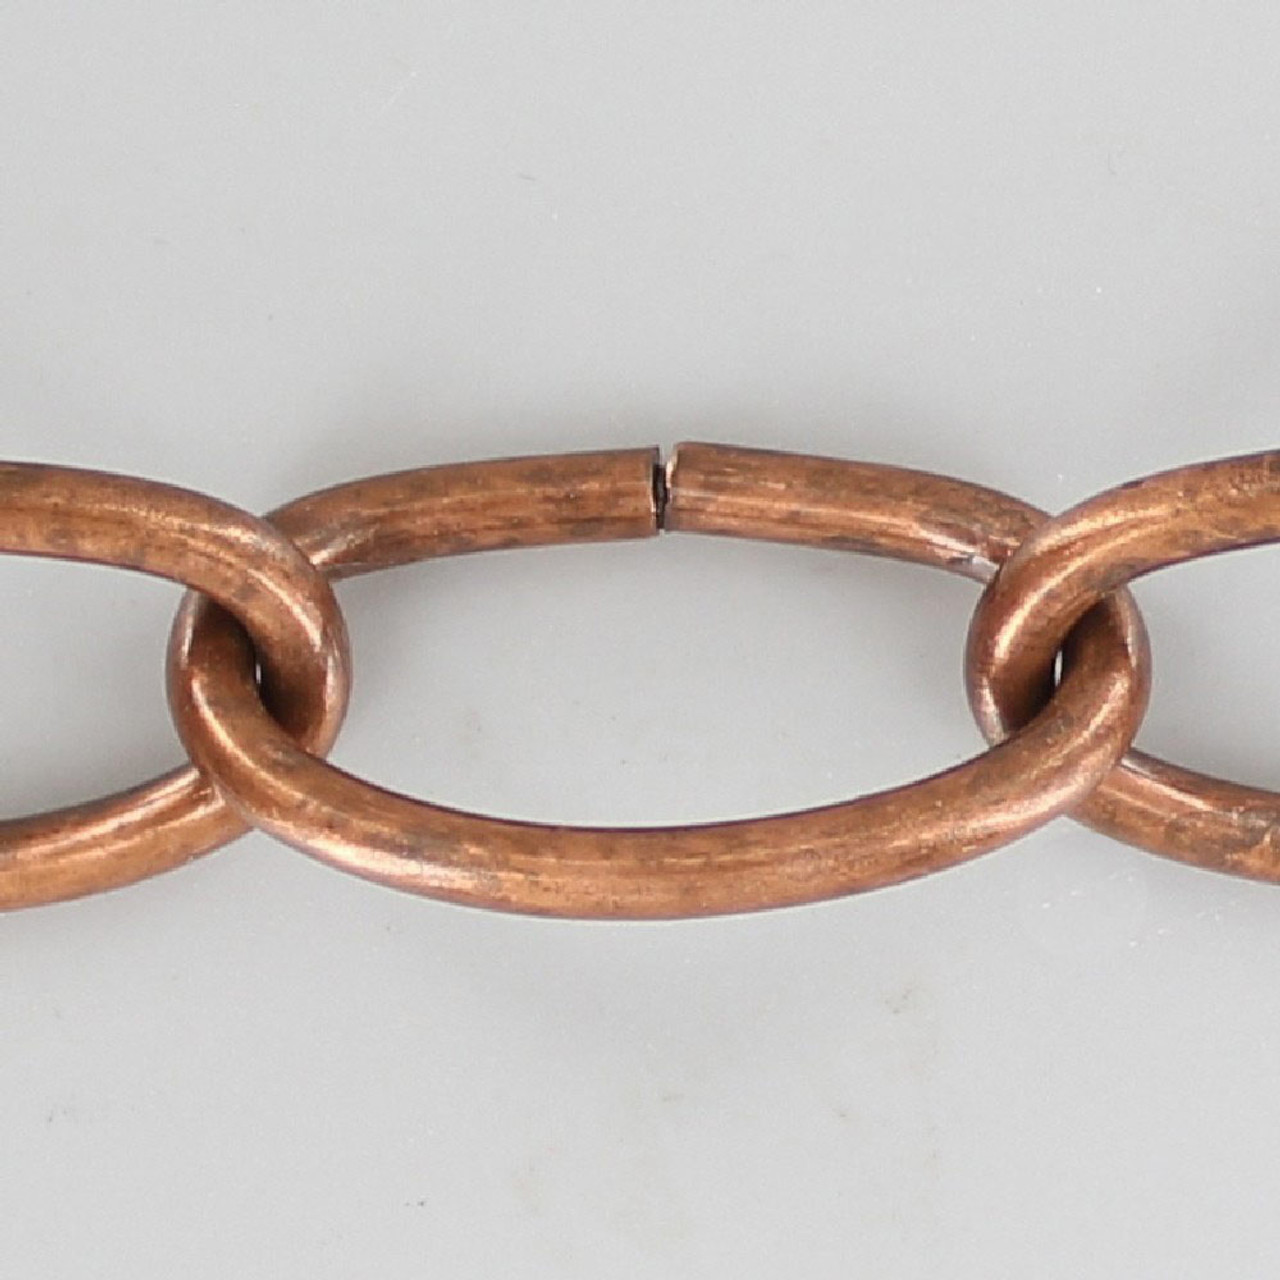 Antique Copper-Plated Oval Link Chain by the Foot